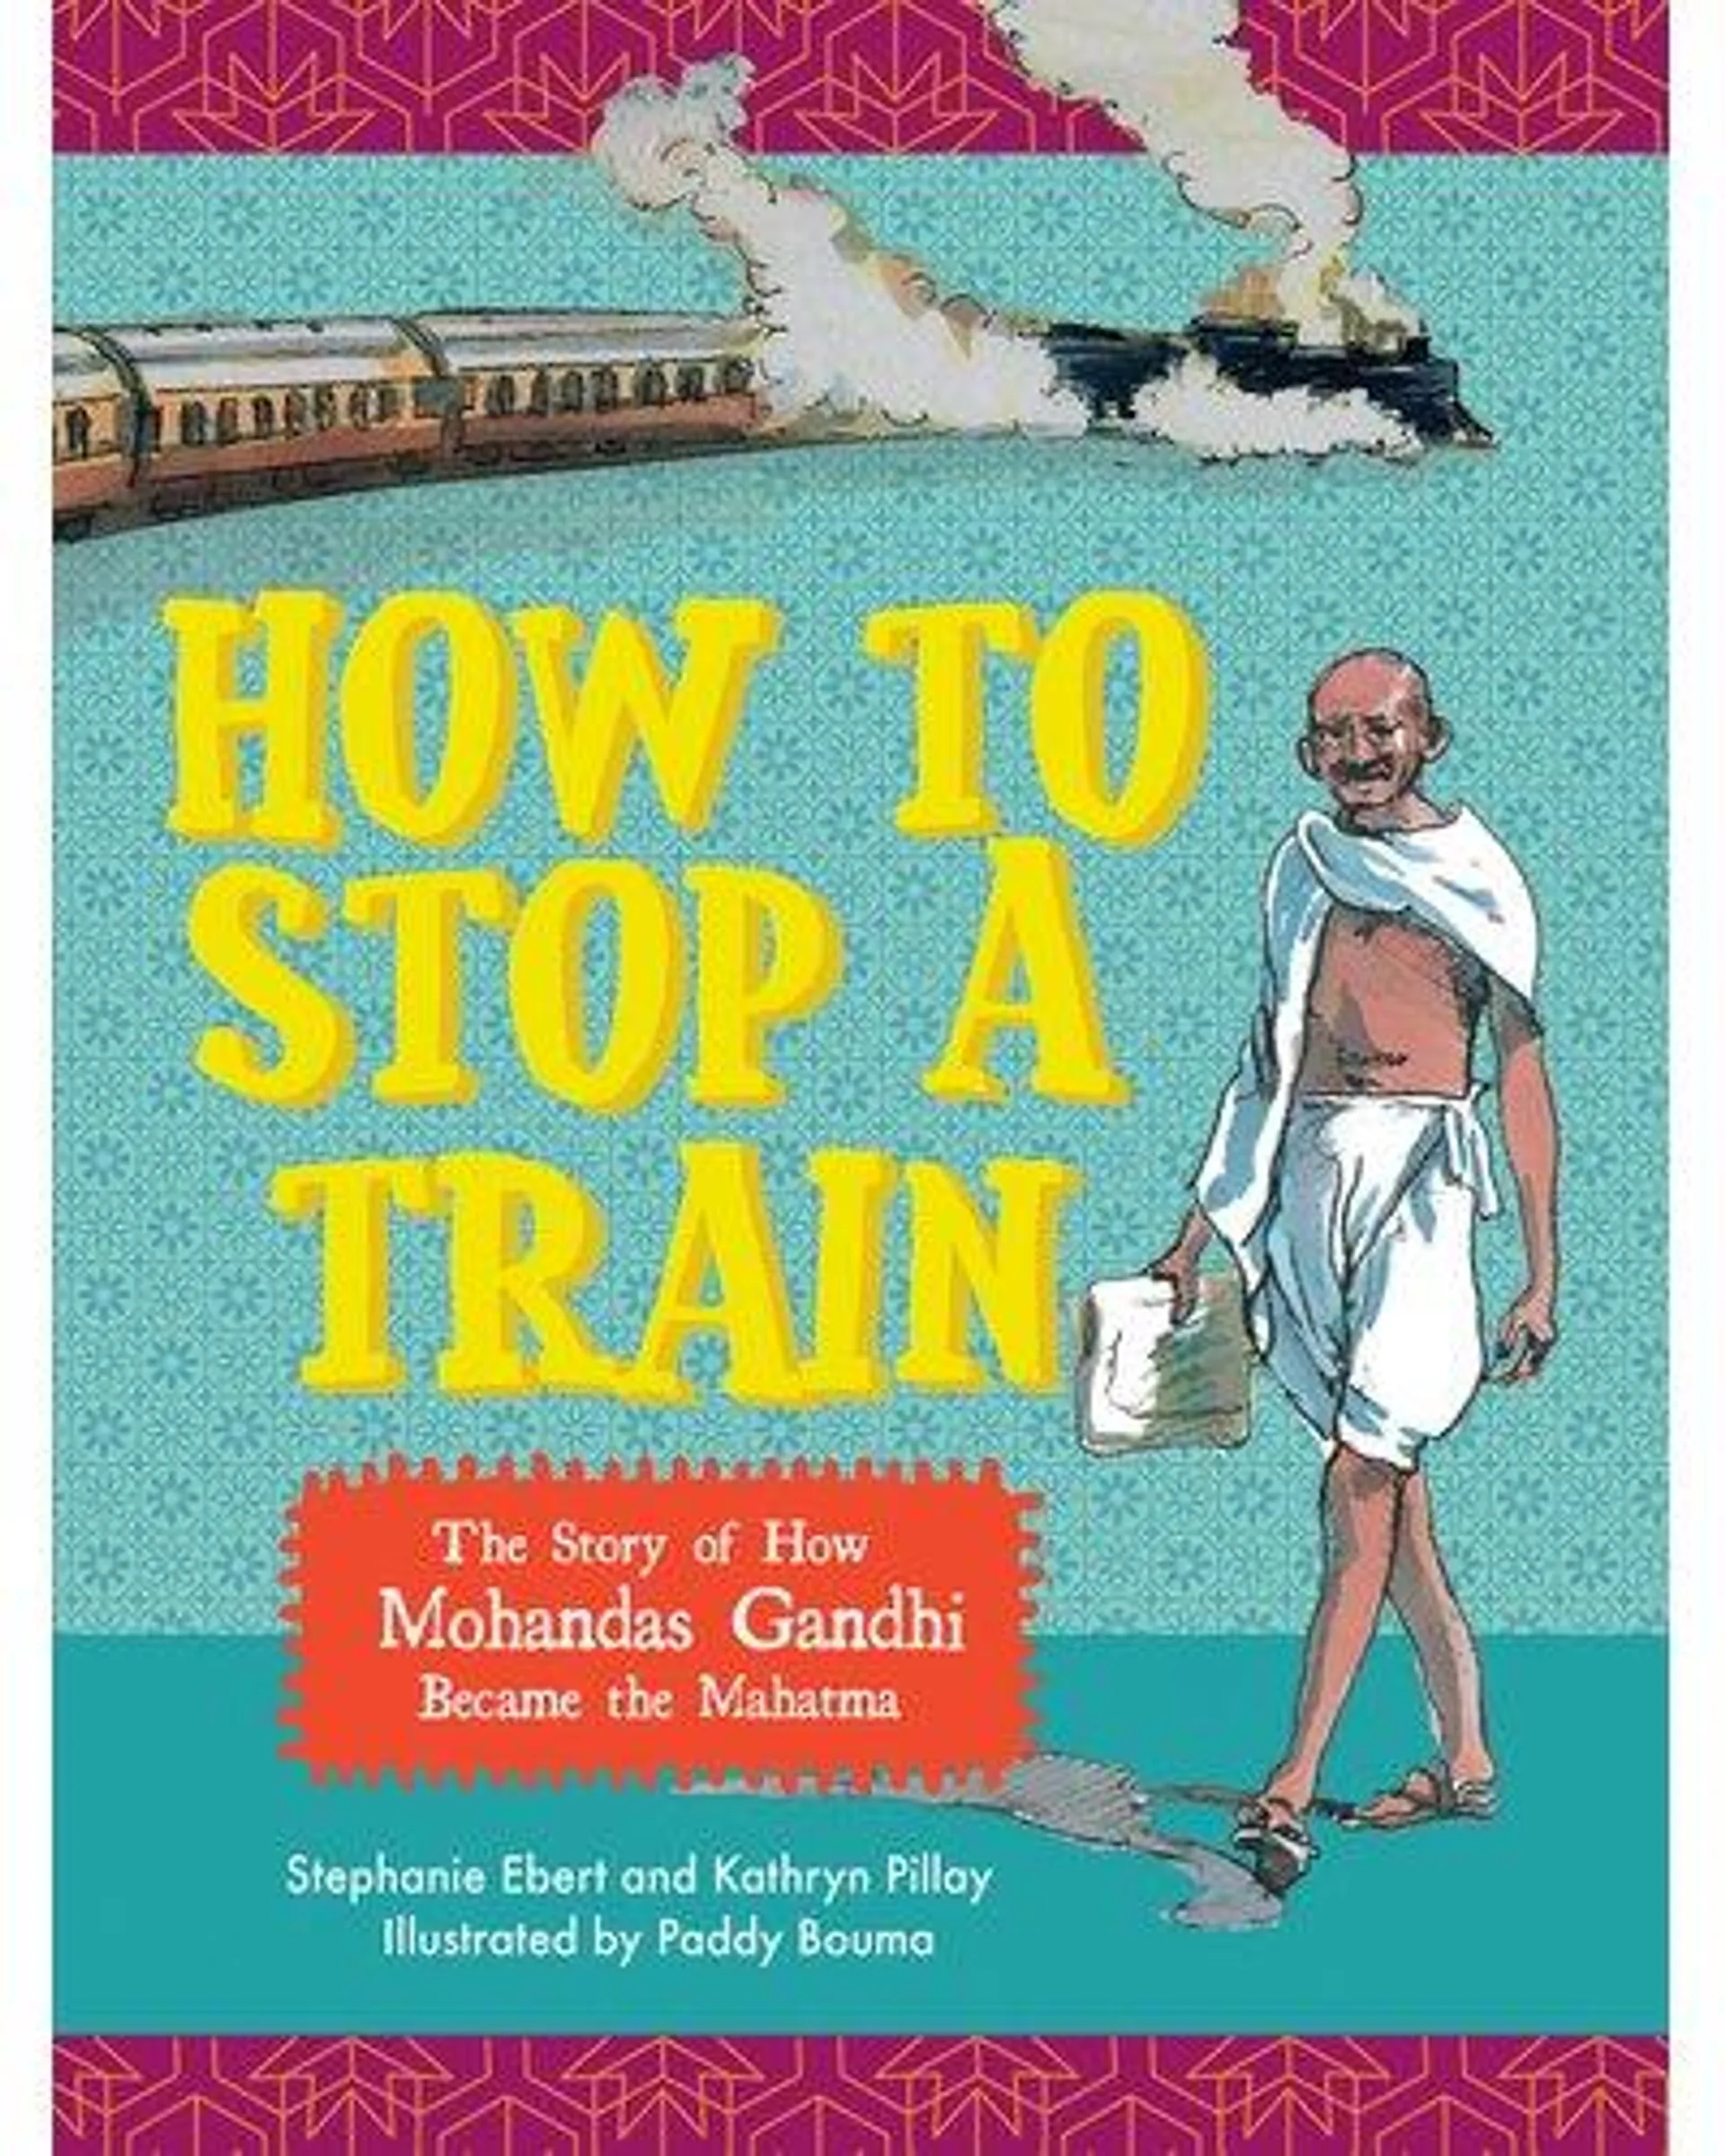 How to Stop a Train - The Story of How Mohandas Gandhi Became the Mahatma (Paperback)